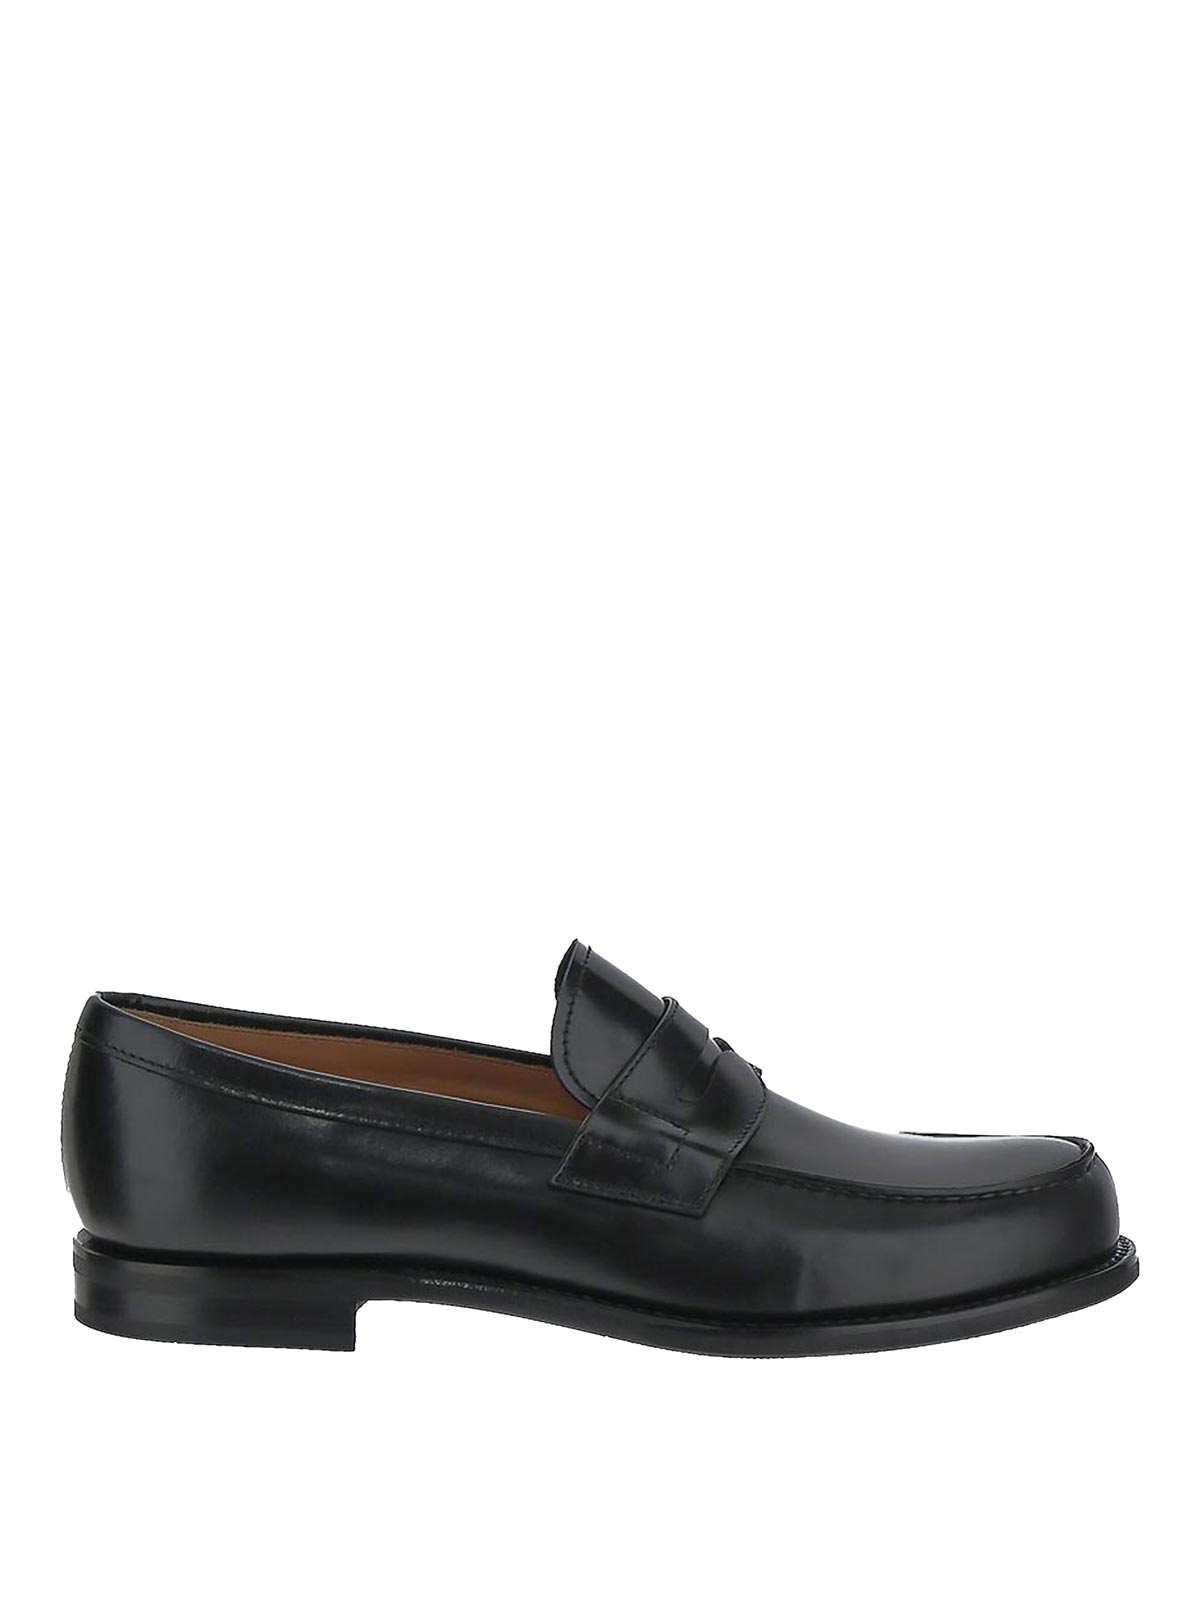 Church's Loafers In Black